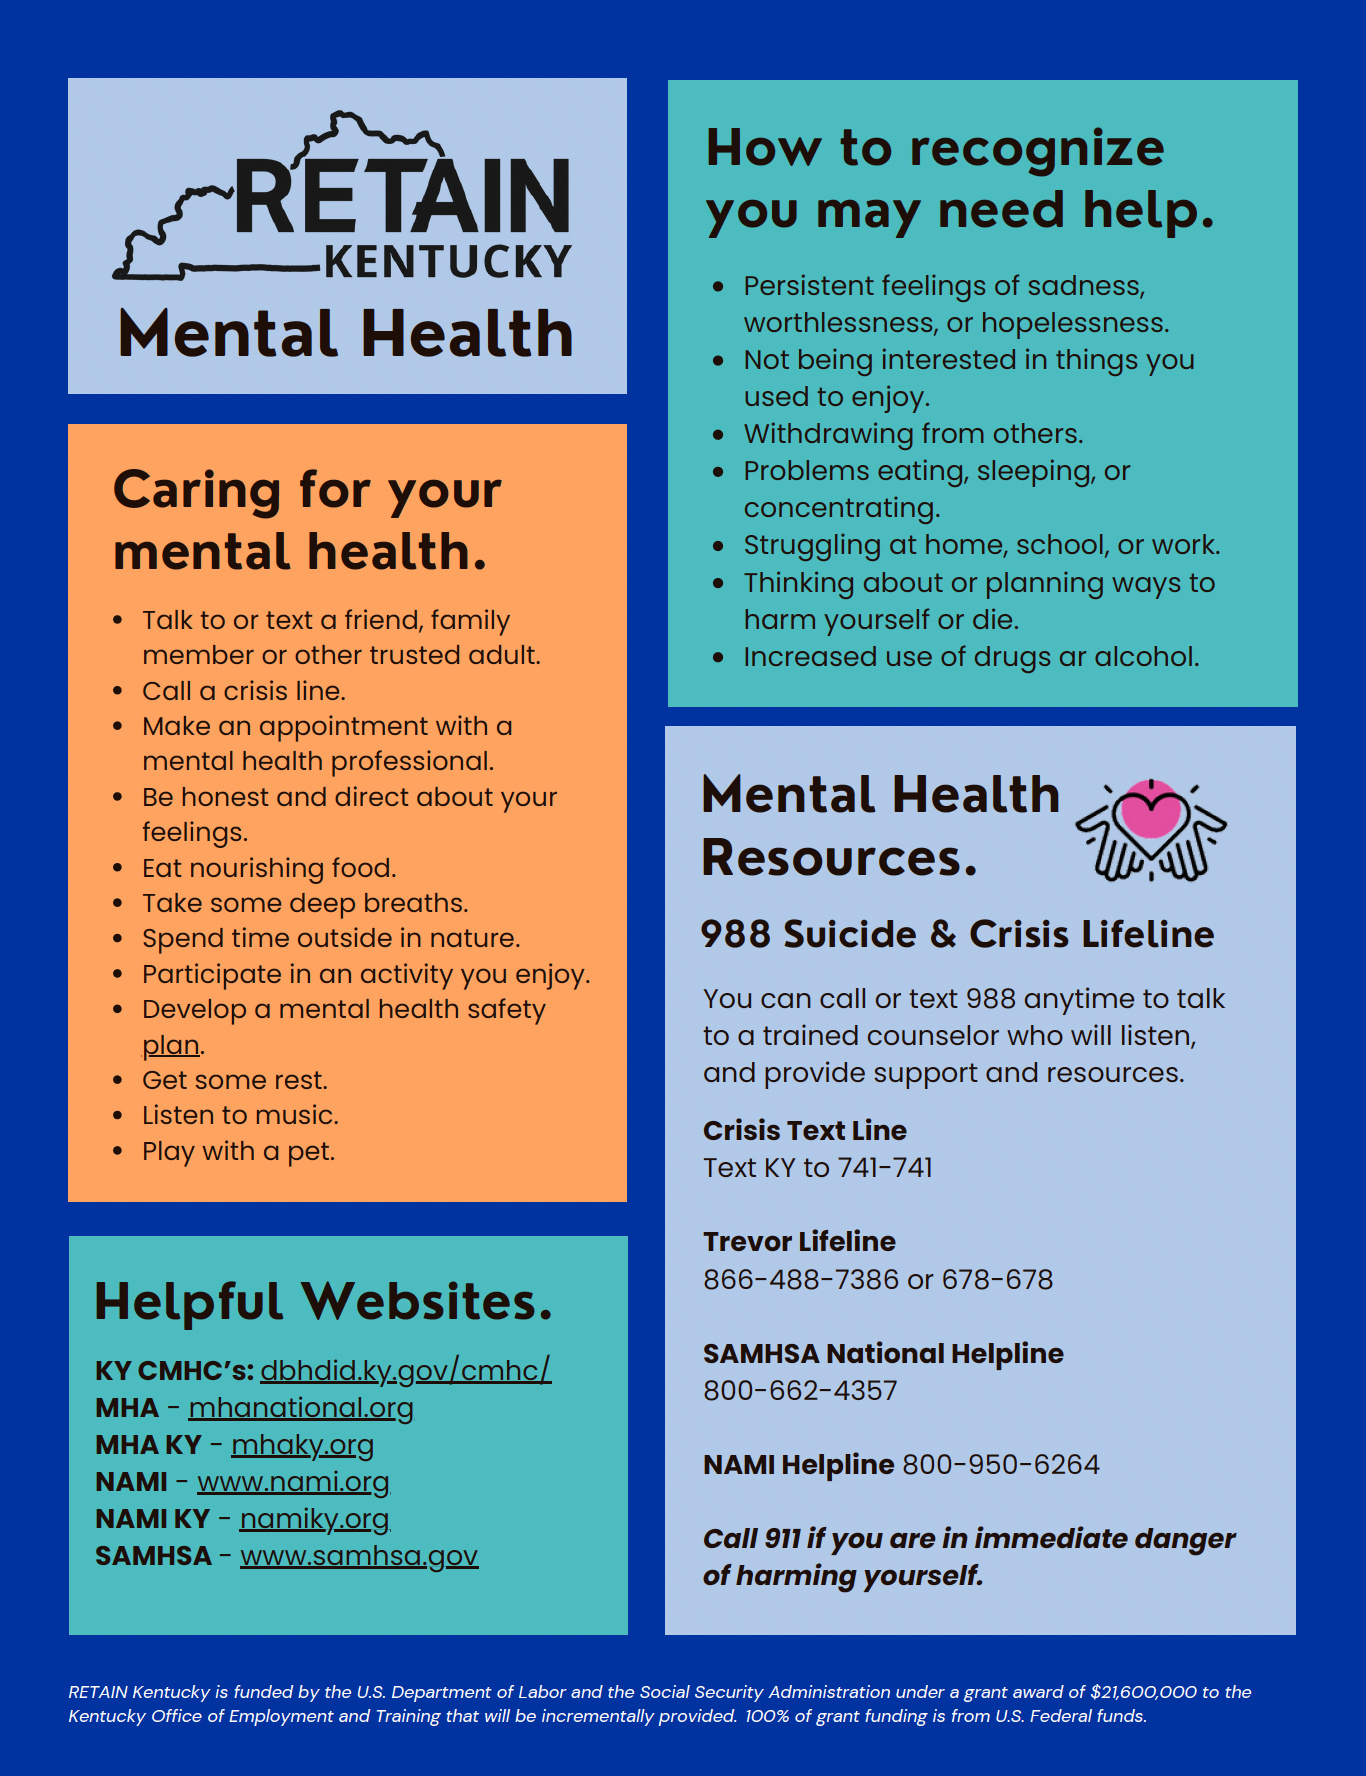 The image is a mental health awareness flyer titled "RETAIN KENTUCKY Mental Health." It is divided into four main sections, each with distinct background colors and text.  Caring for your mental health: This section suggests activities like talking to friends, calling crisis lines, eating well, and spending time outdoors to maintain mental health. How to recognize you may need help: This section lists symptoms indicating the need for mental health support, such as persistent sadness, withdrawal from others, and increased substance use. Mental Health Resources: The section provides crisis helpline numbers including the 988 Suicide & Crisis Lifeline and other support services like the Trevor Lifeline and SAMHSA National Helpline. Helpful Websites: This section lists URLs for mental health resources such as KY CMHC, MHA, NAMI, and SAMHSA.